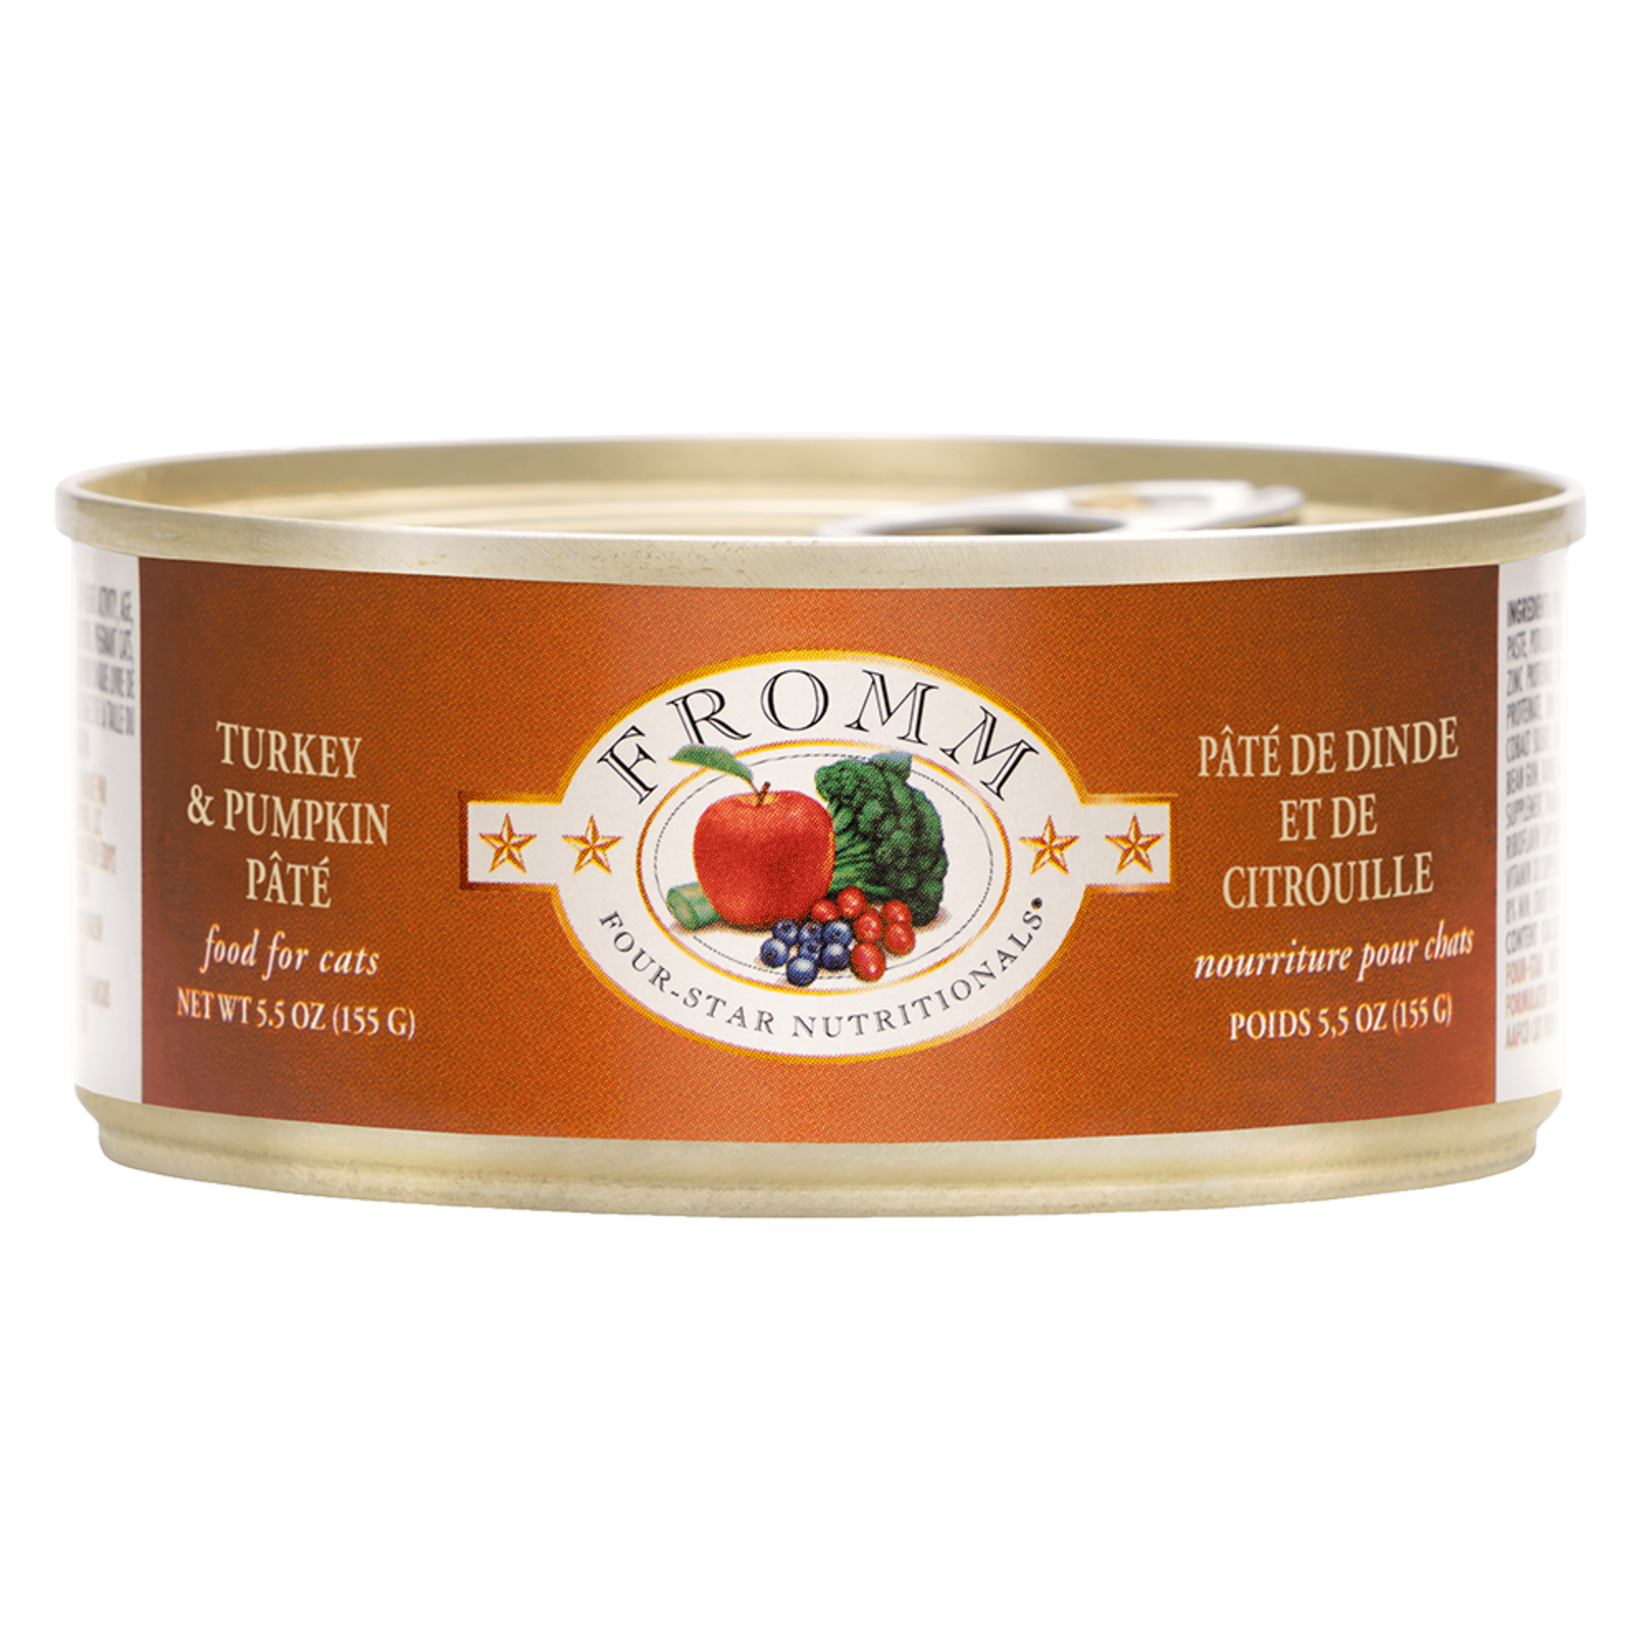 Fromm Fromm Wet Cat Food Four Star Nutritionals Turkey and Pumpkin Pate 5.5oz Can